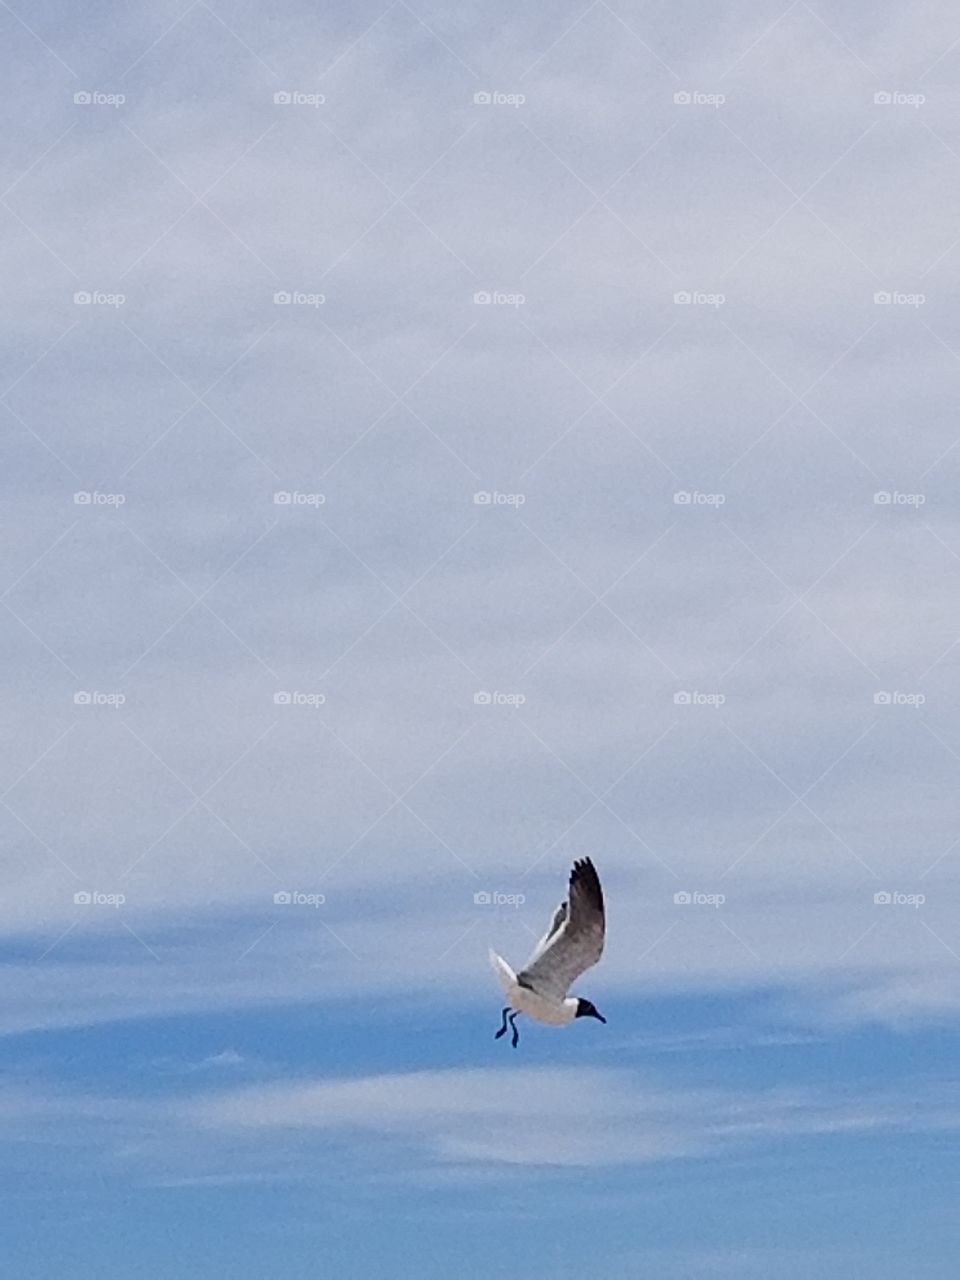 A Seagull  at the  beach in Seaside New Jersey